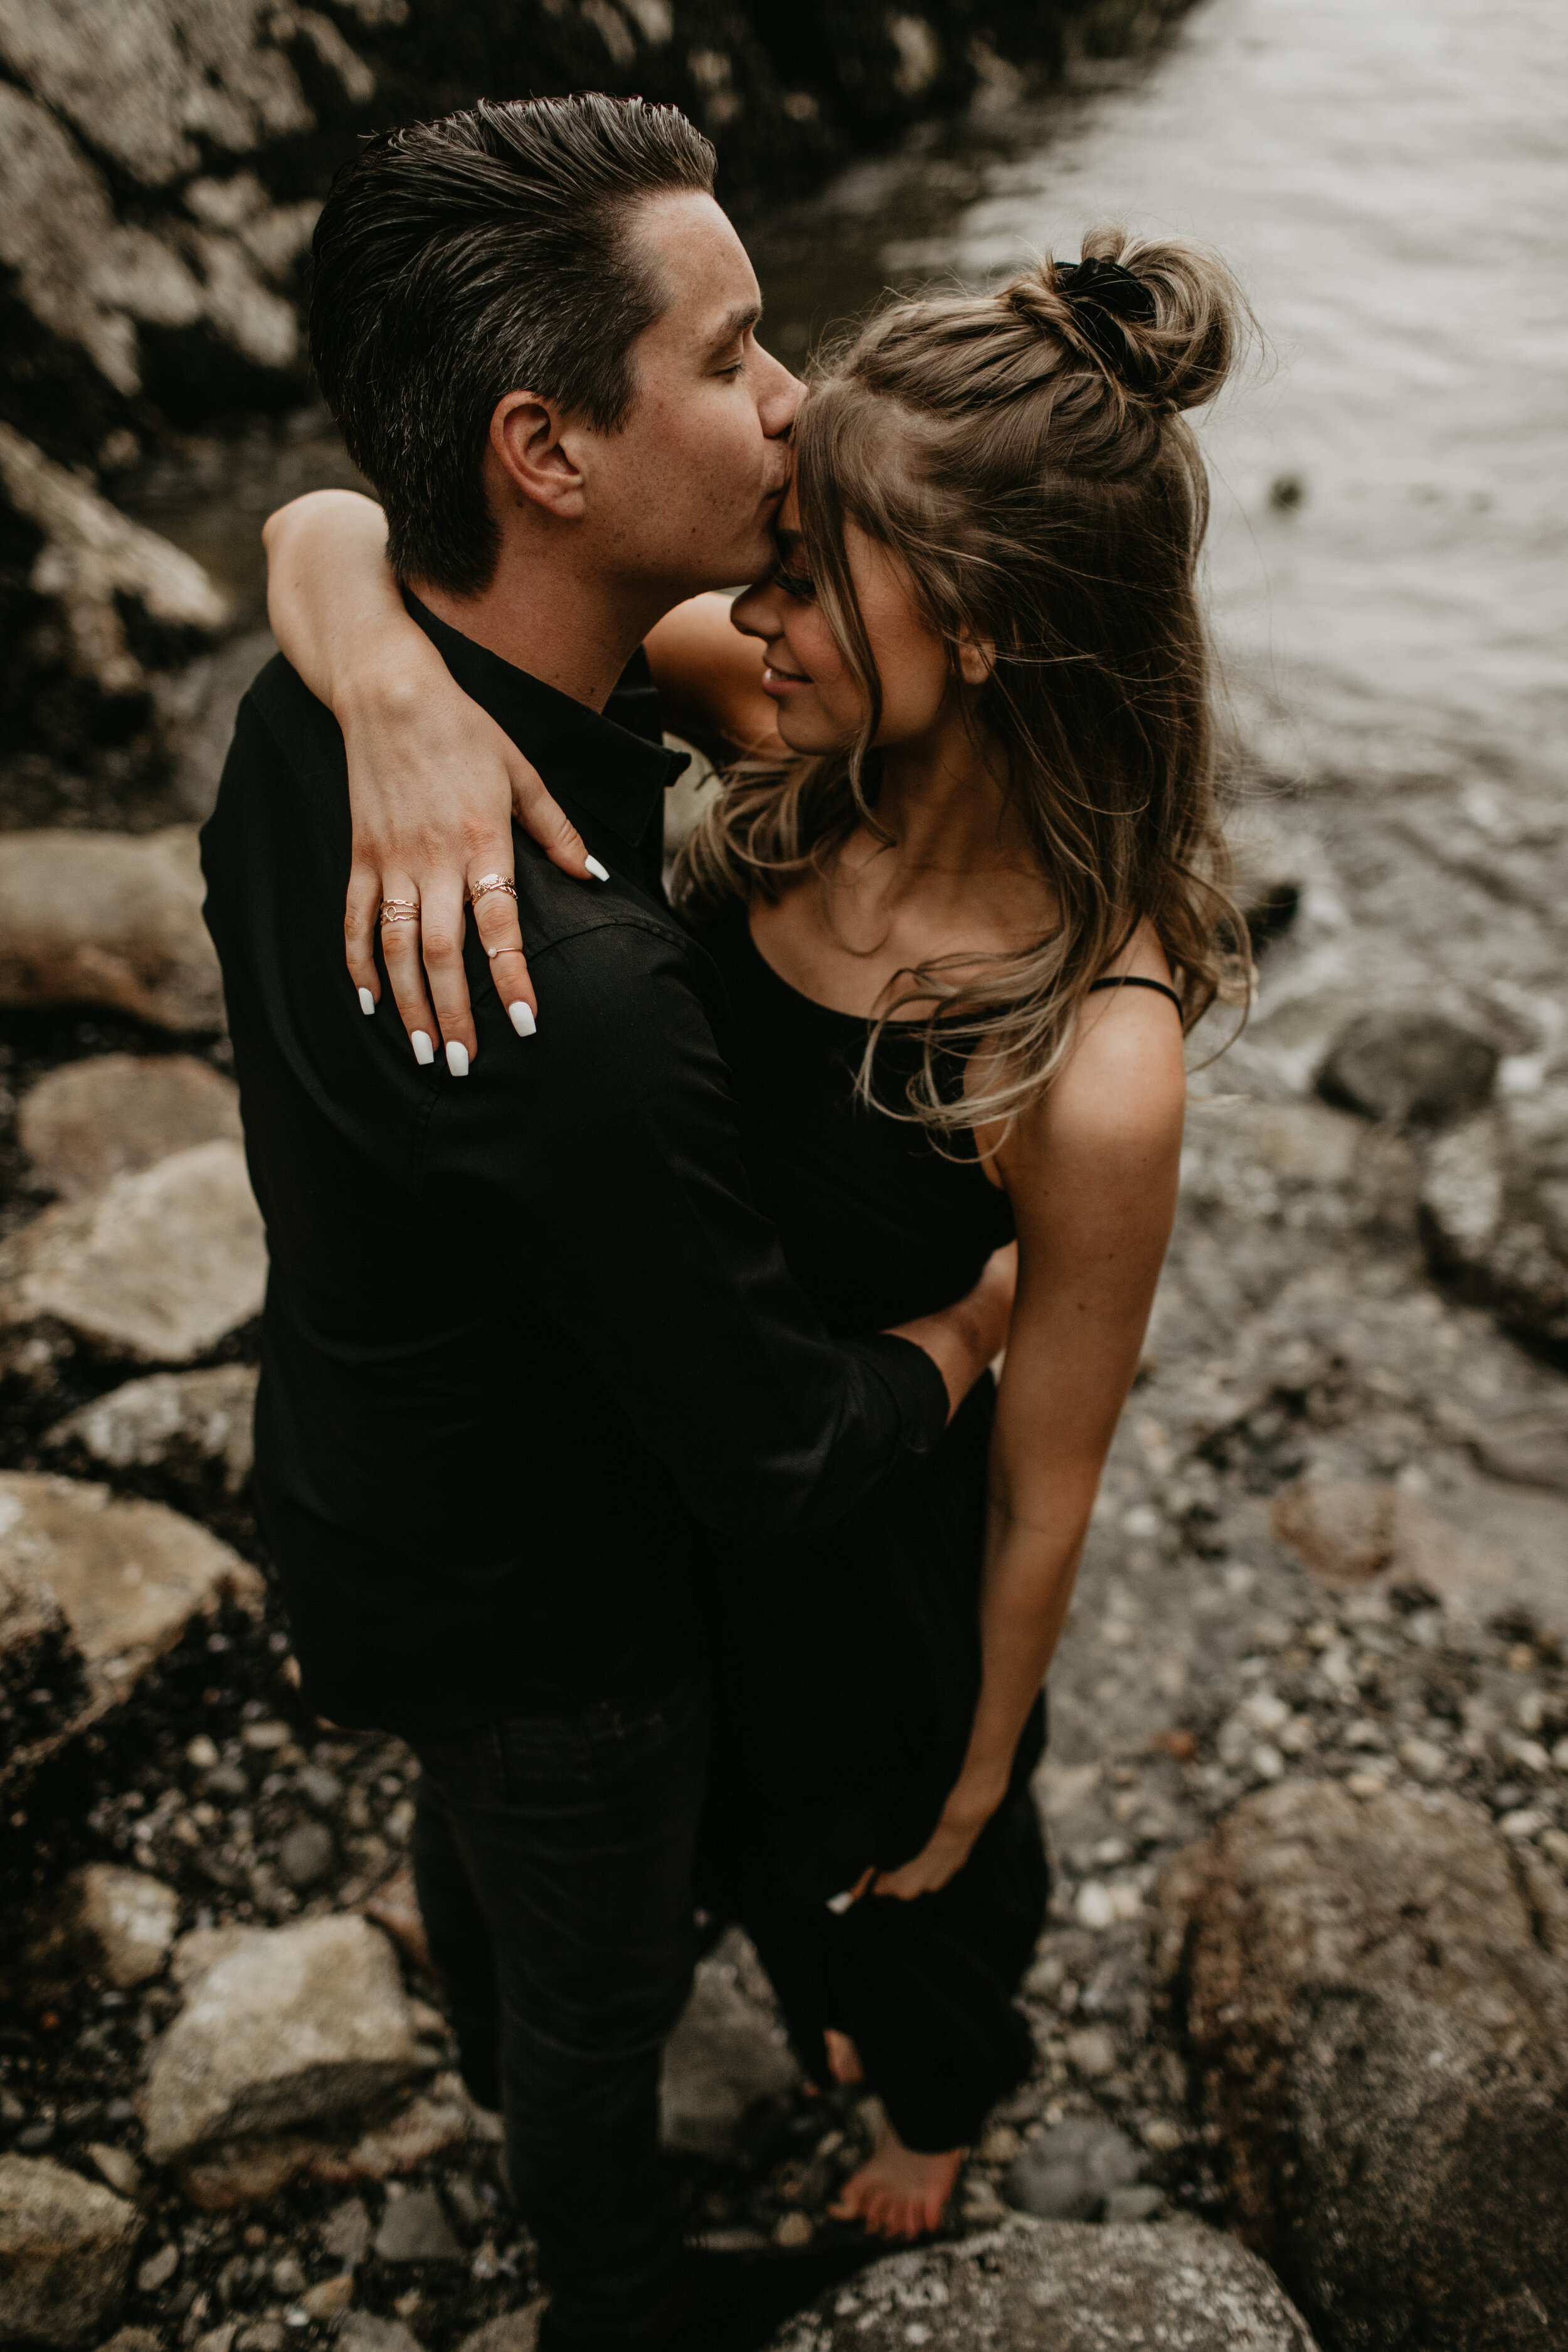 Odessa & Alex Engagement Whytecliff Park - Ivory Embers Photography-39.jpg